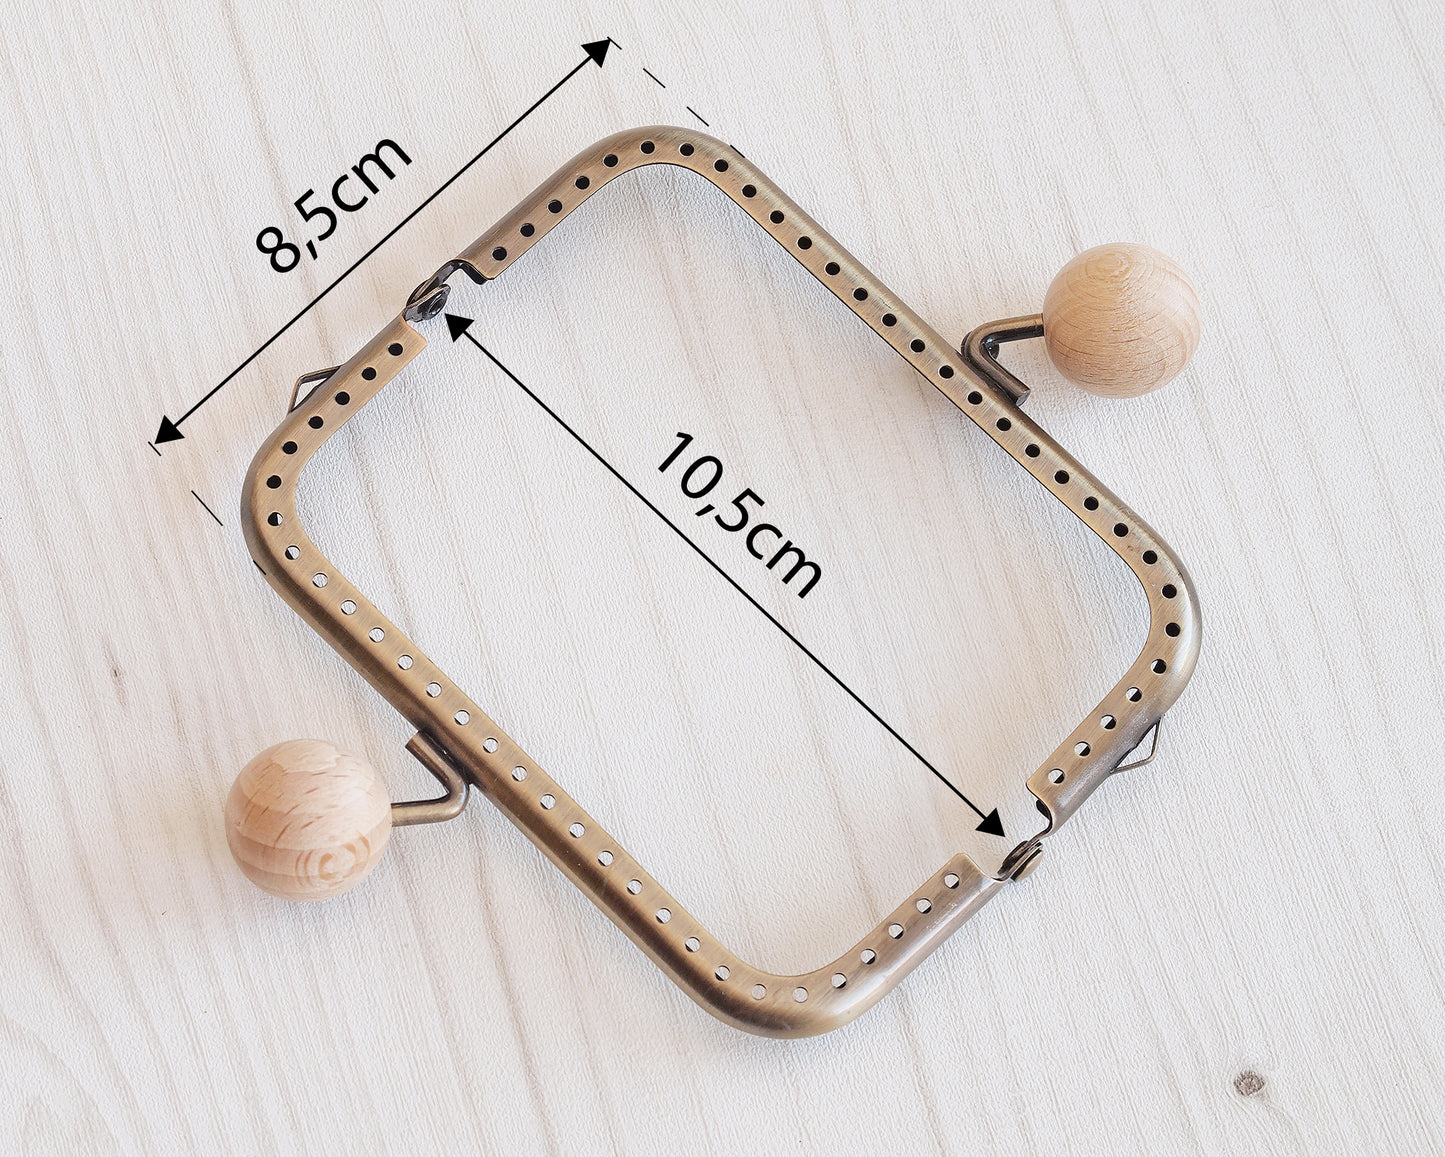 10.5cm. purse frame with natural wooden balls